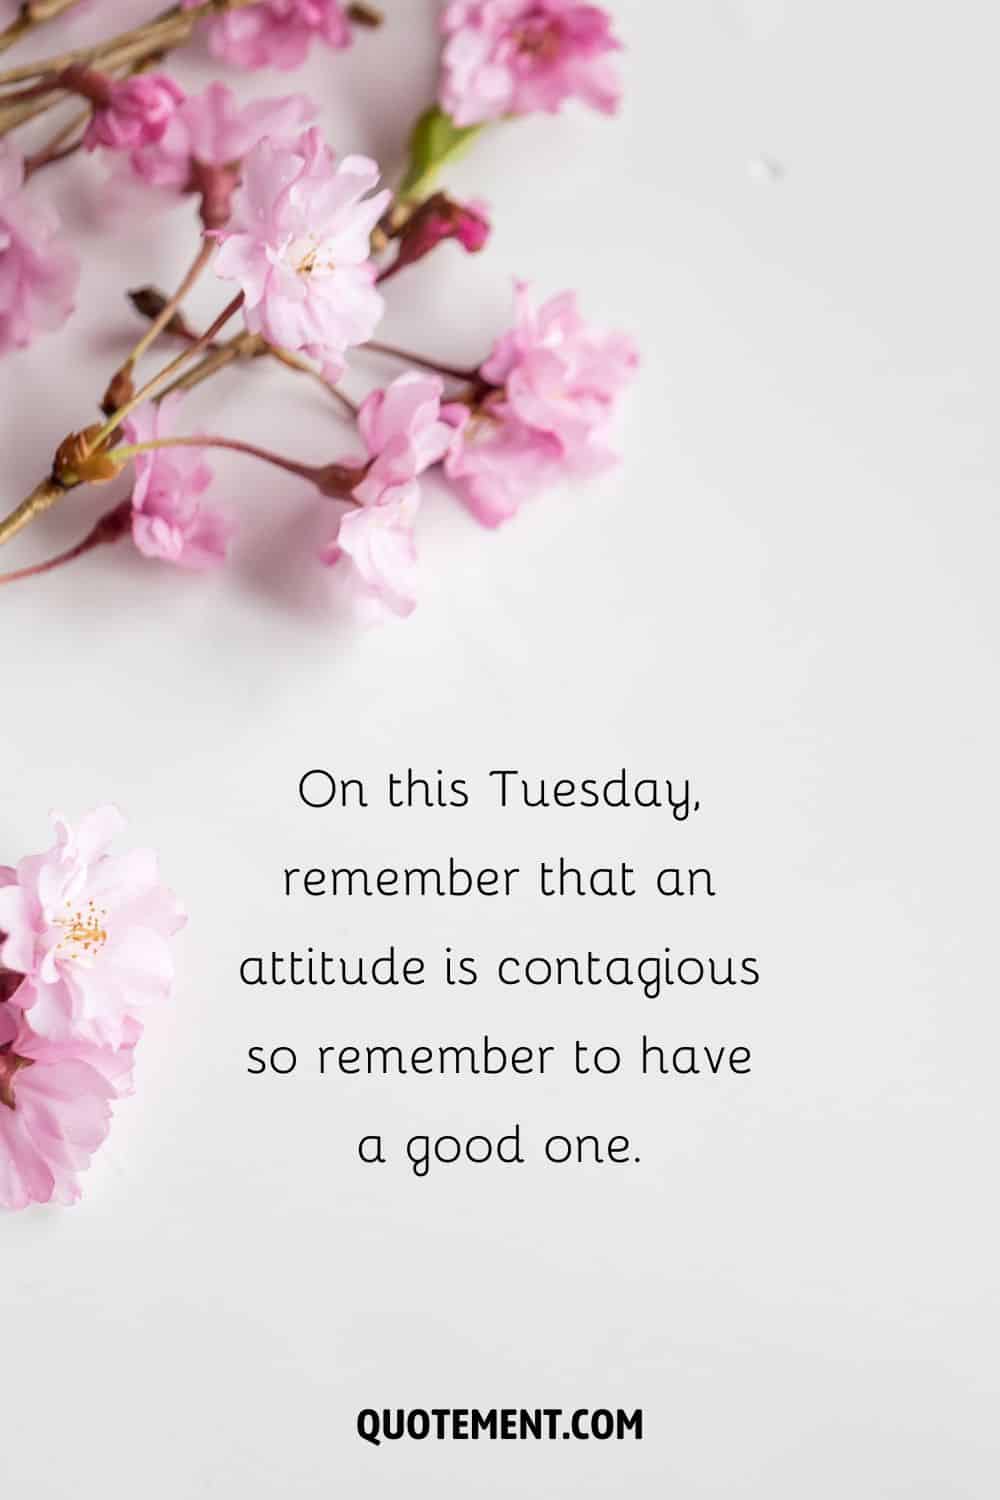 “On this Tuesday, remember that an attitude is contagious so remember to have a good one.” — Unknown